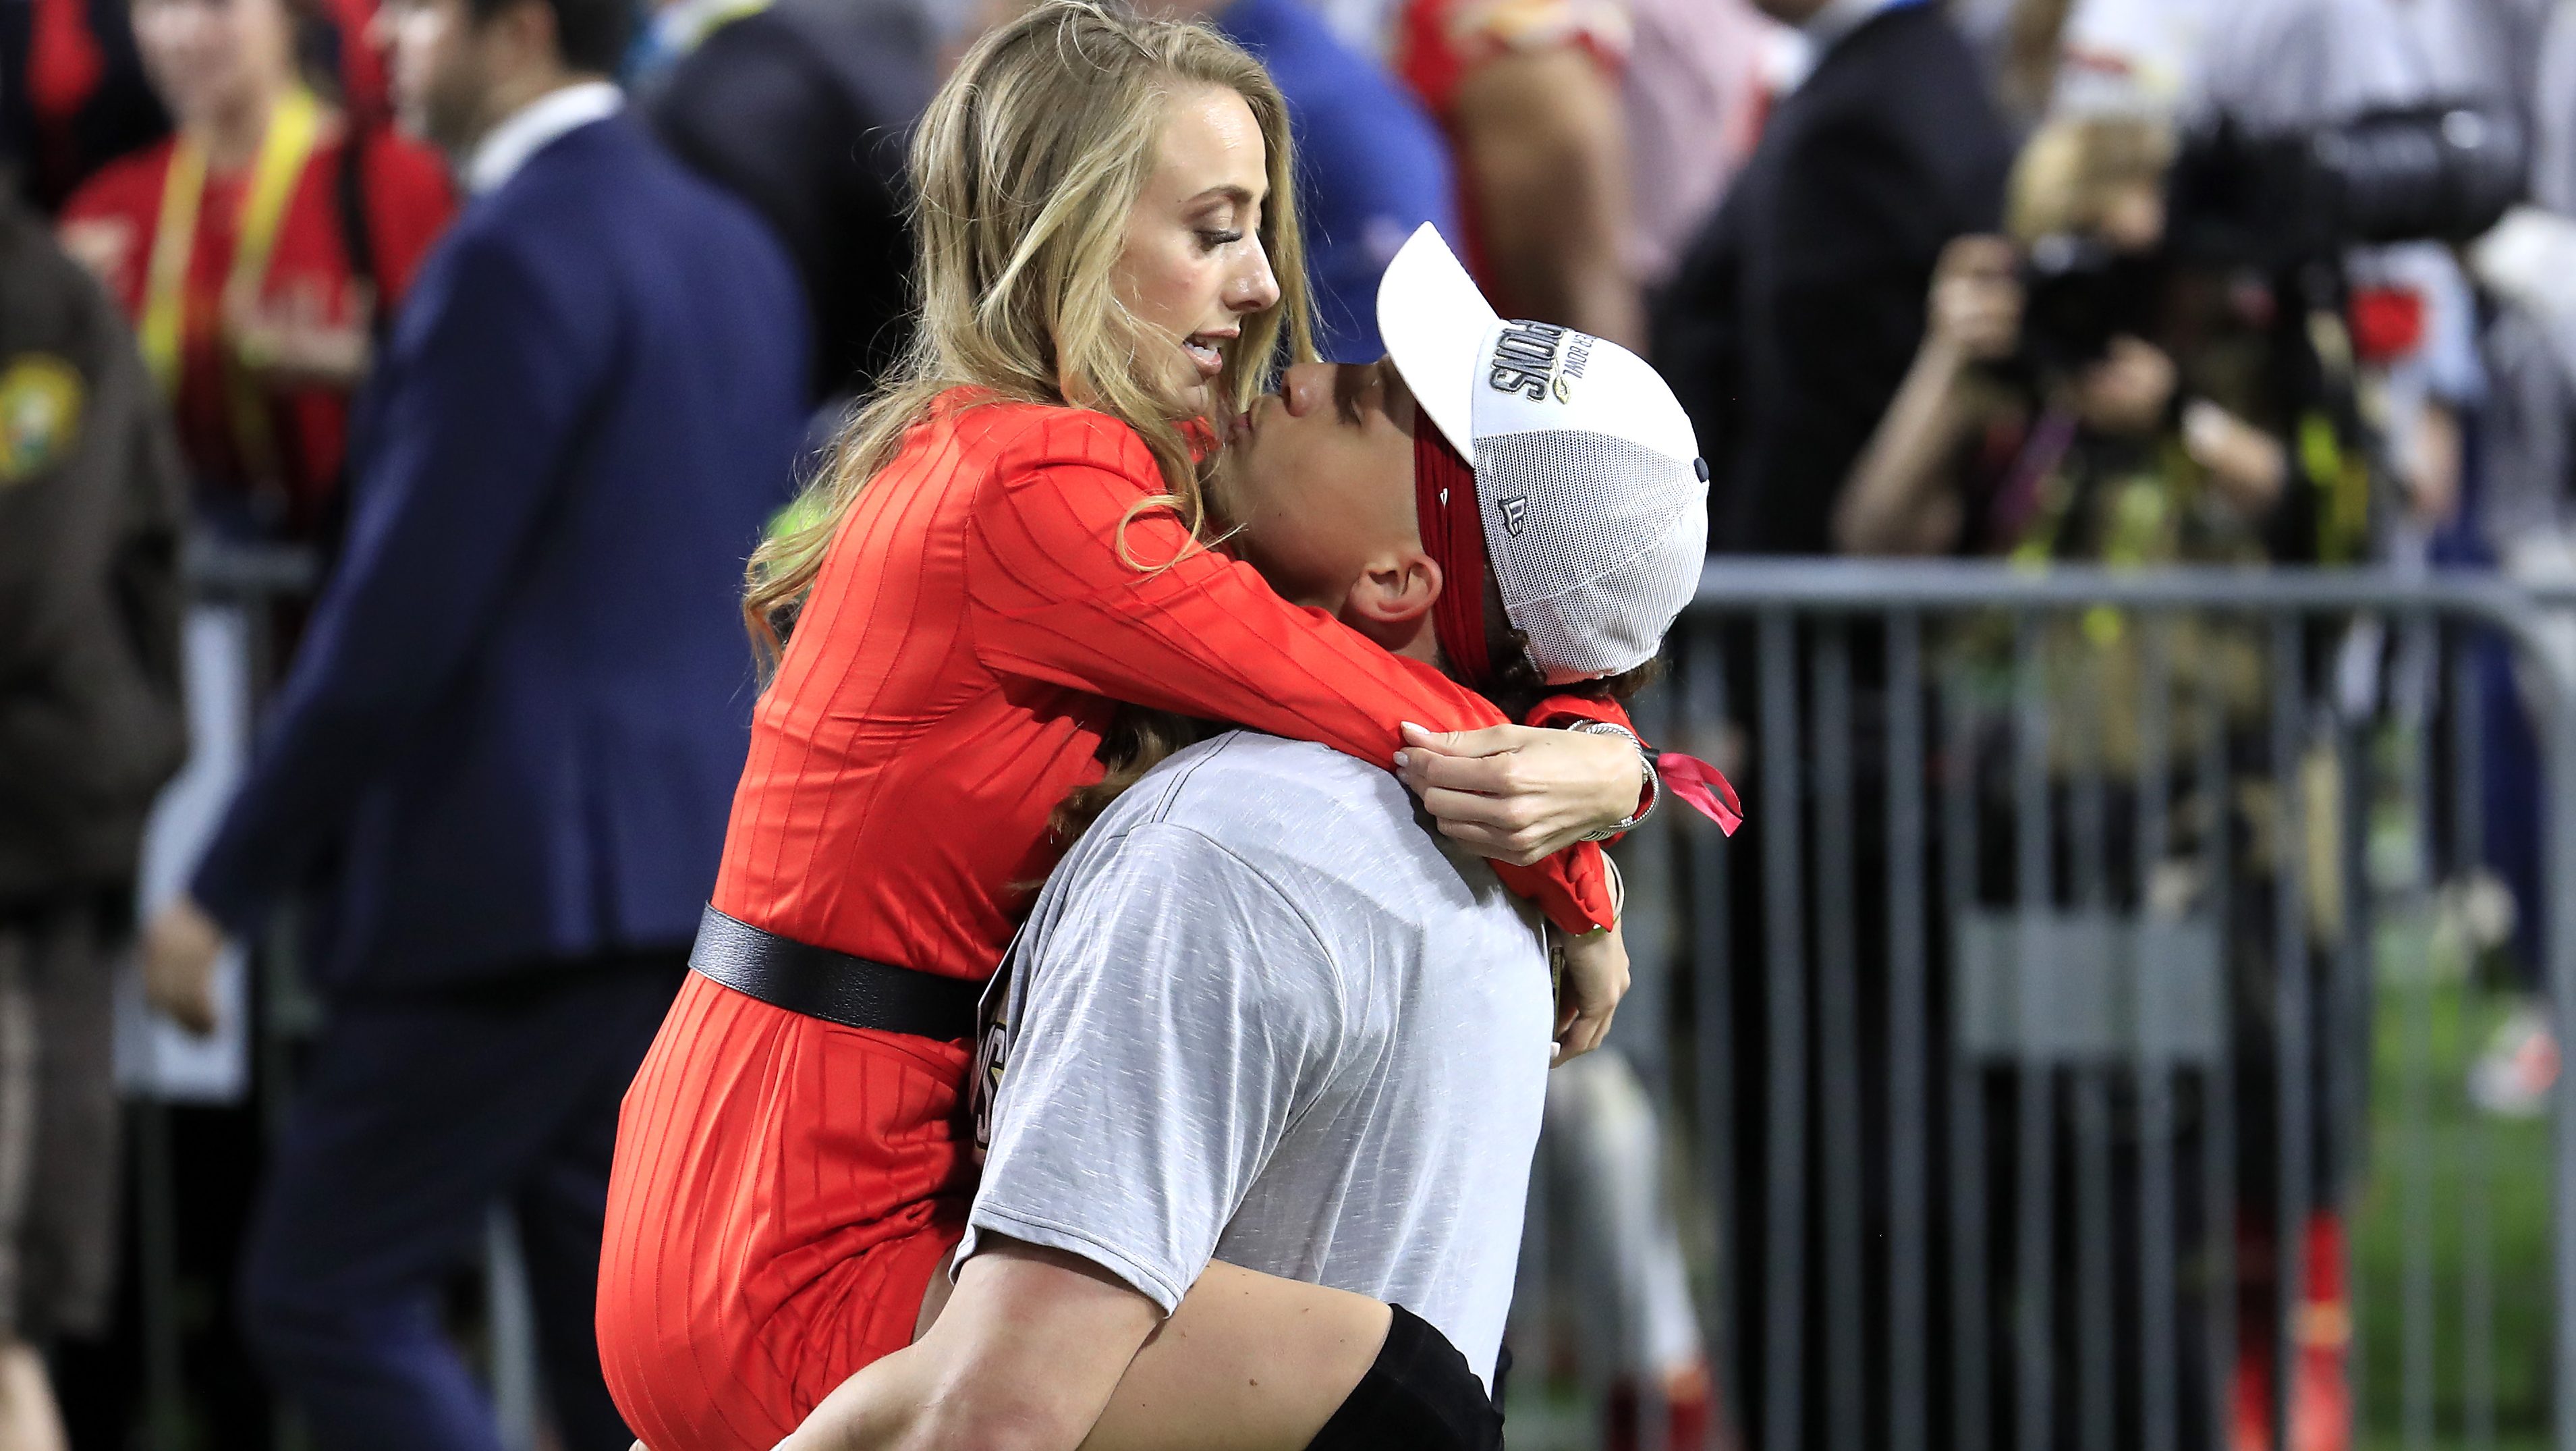 Patrick Mahomes Holds Daughter Sterling Skye After Being Named MVP